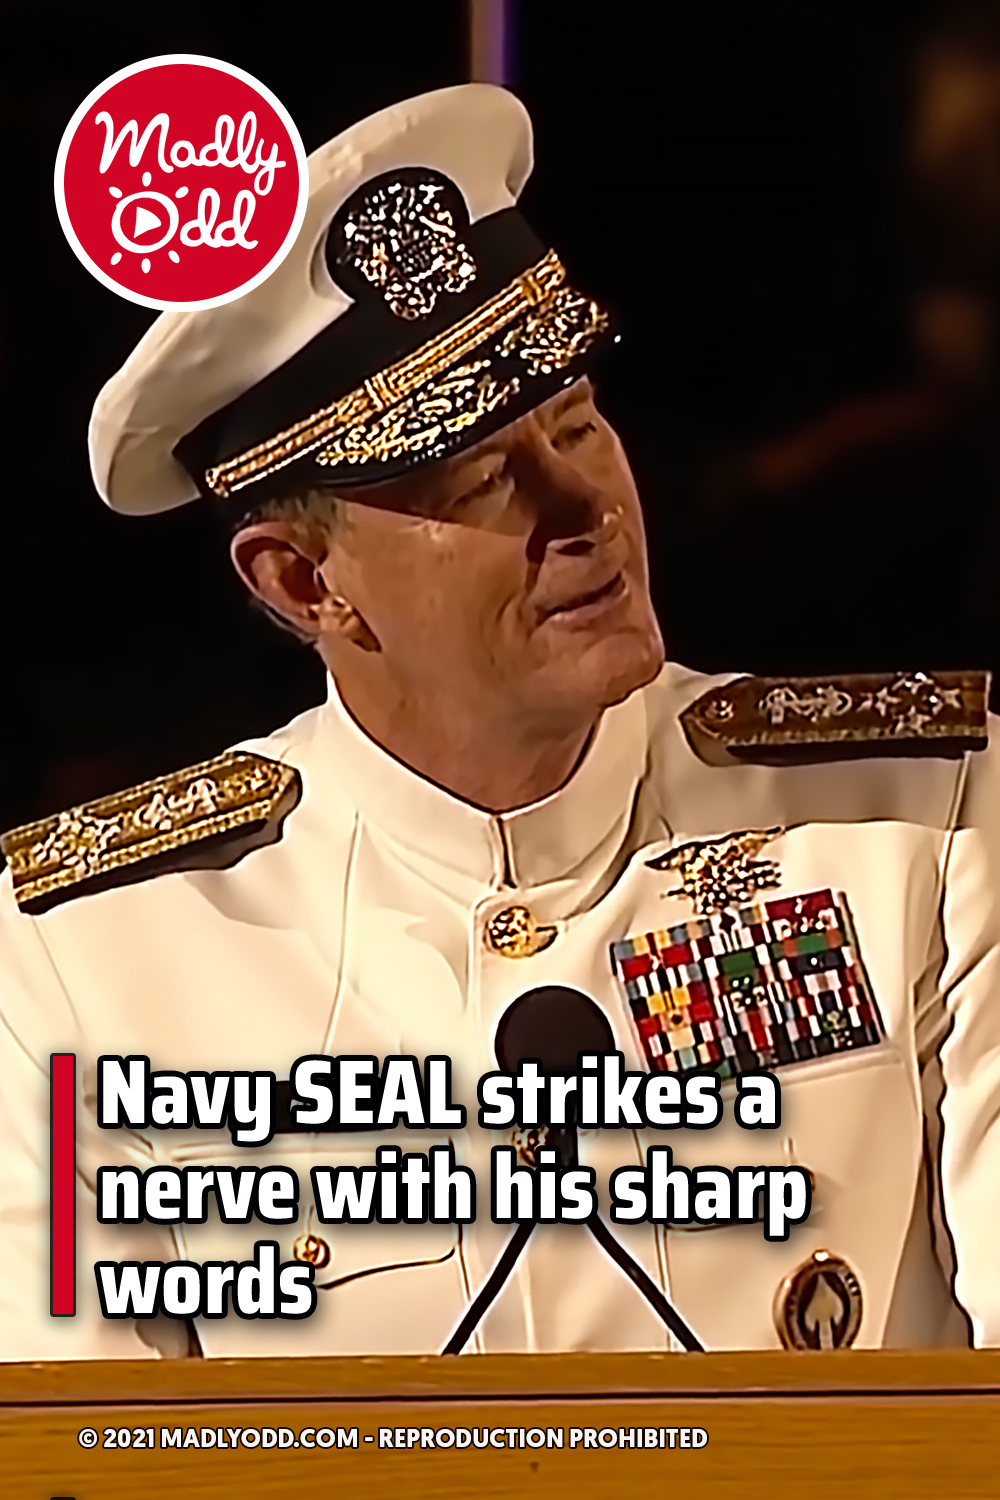 Navy SEAL strikes a nerve with his sharp words